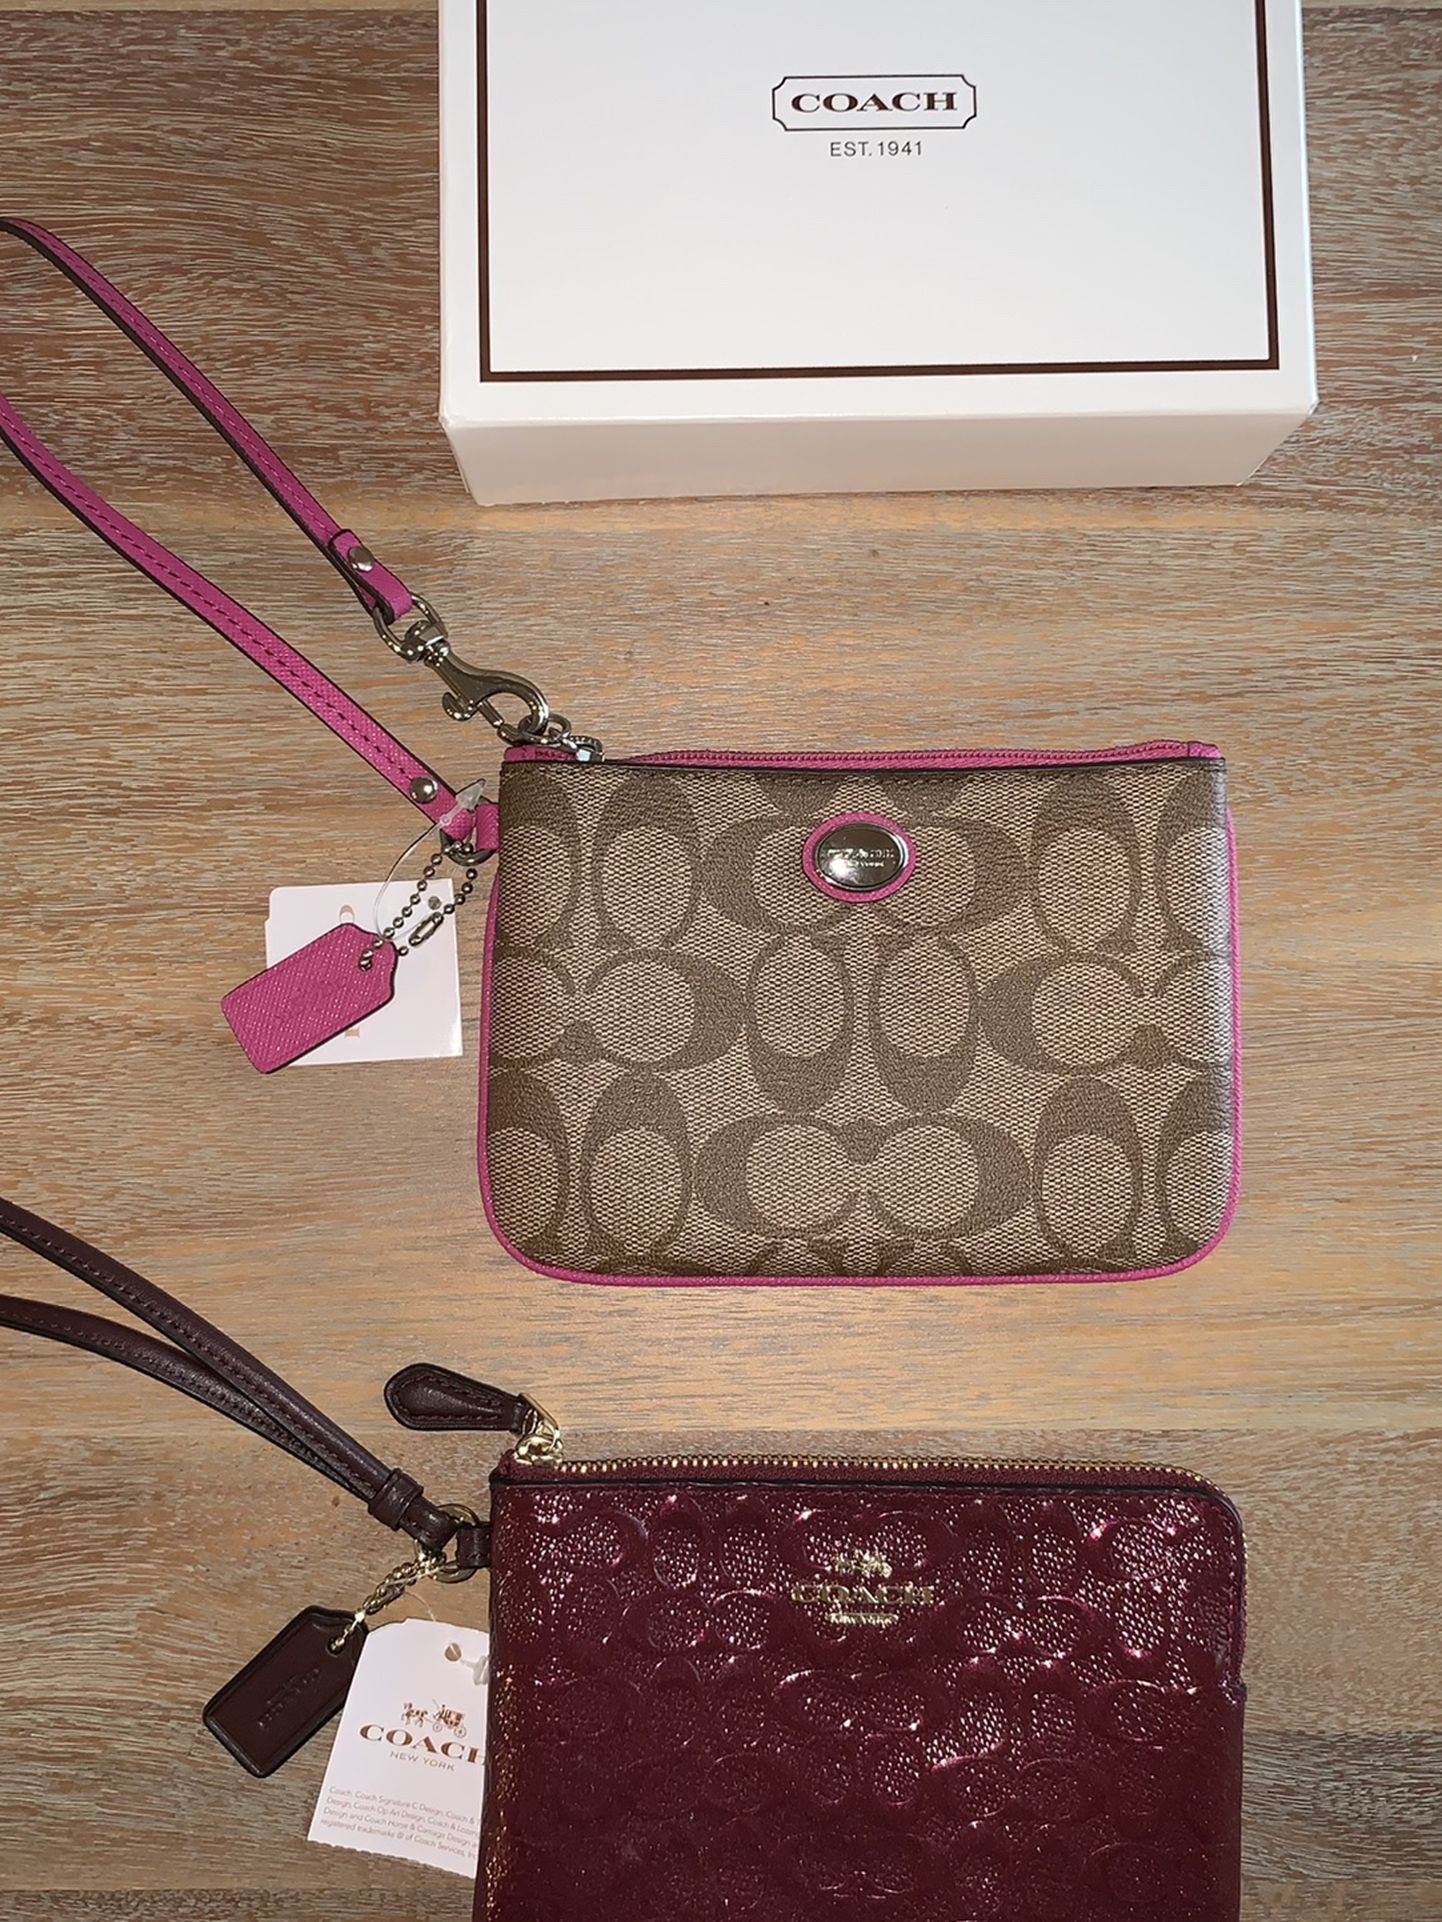 New Coach Wristlet Wallet - Choose from two